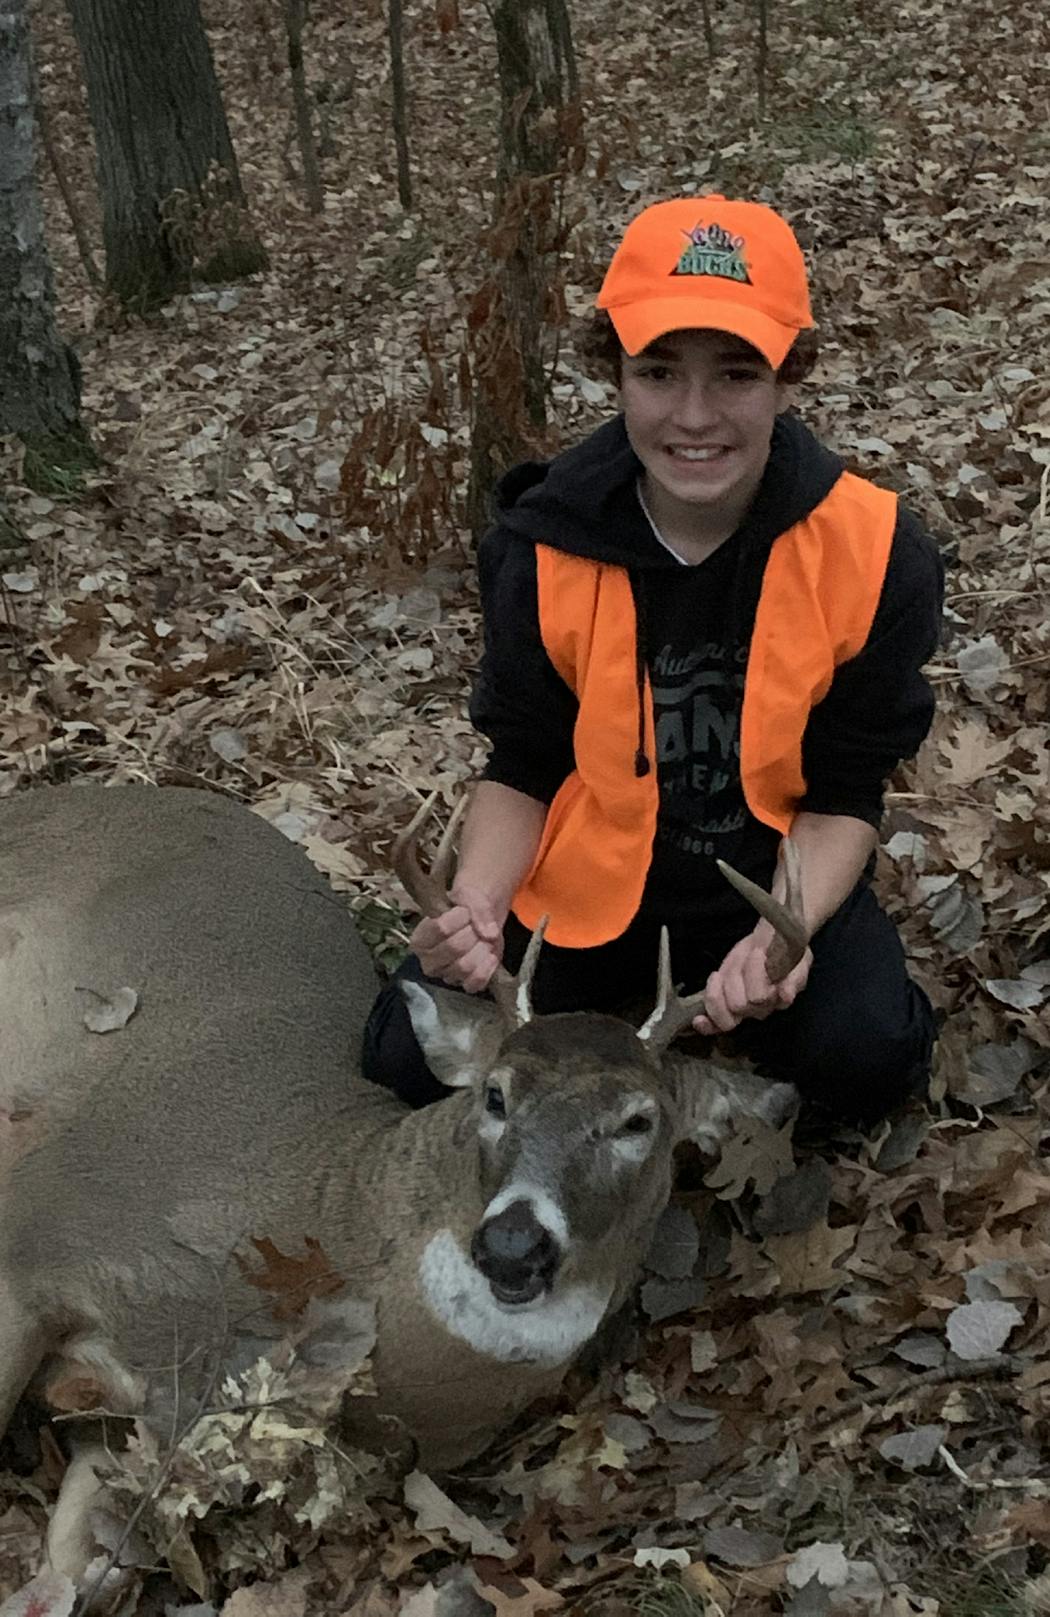 Xavier Otis-Sproule, 14, of Inver Grove Heights, dropped this 8-point buck on opening weekend. Hunting with his family on private land near Pillager, Minn., Xavier took his trophy Sunday about 4:45 p.m., ending the season’s first weekend on a high note.